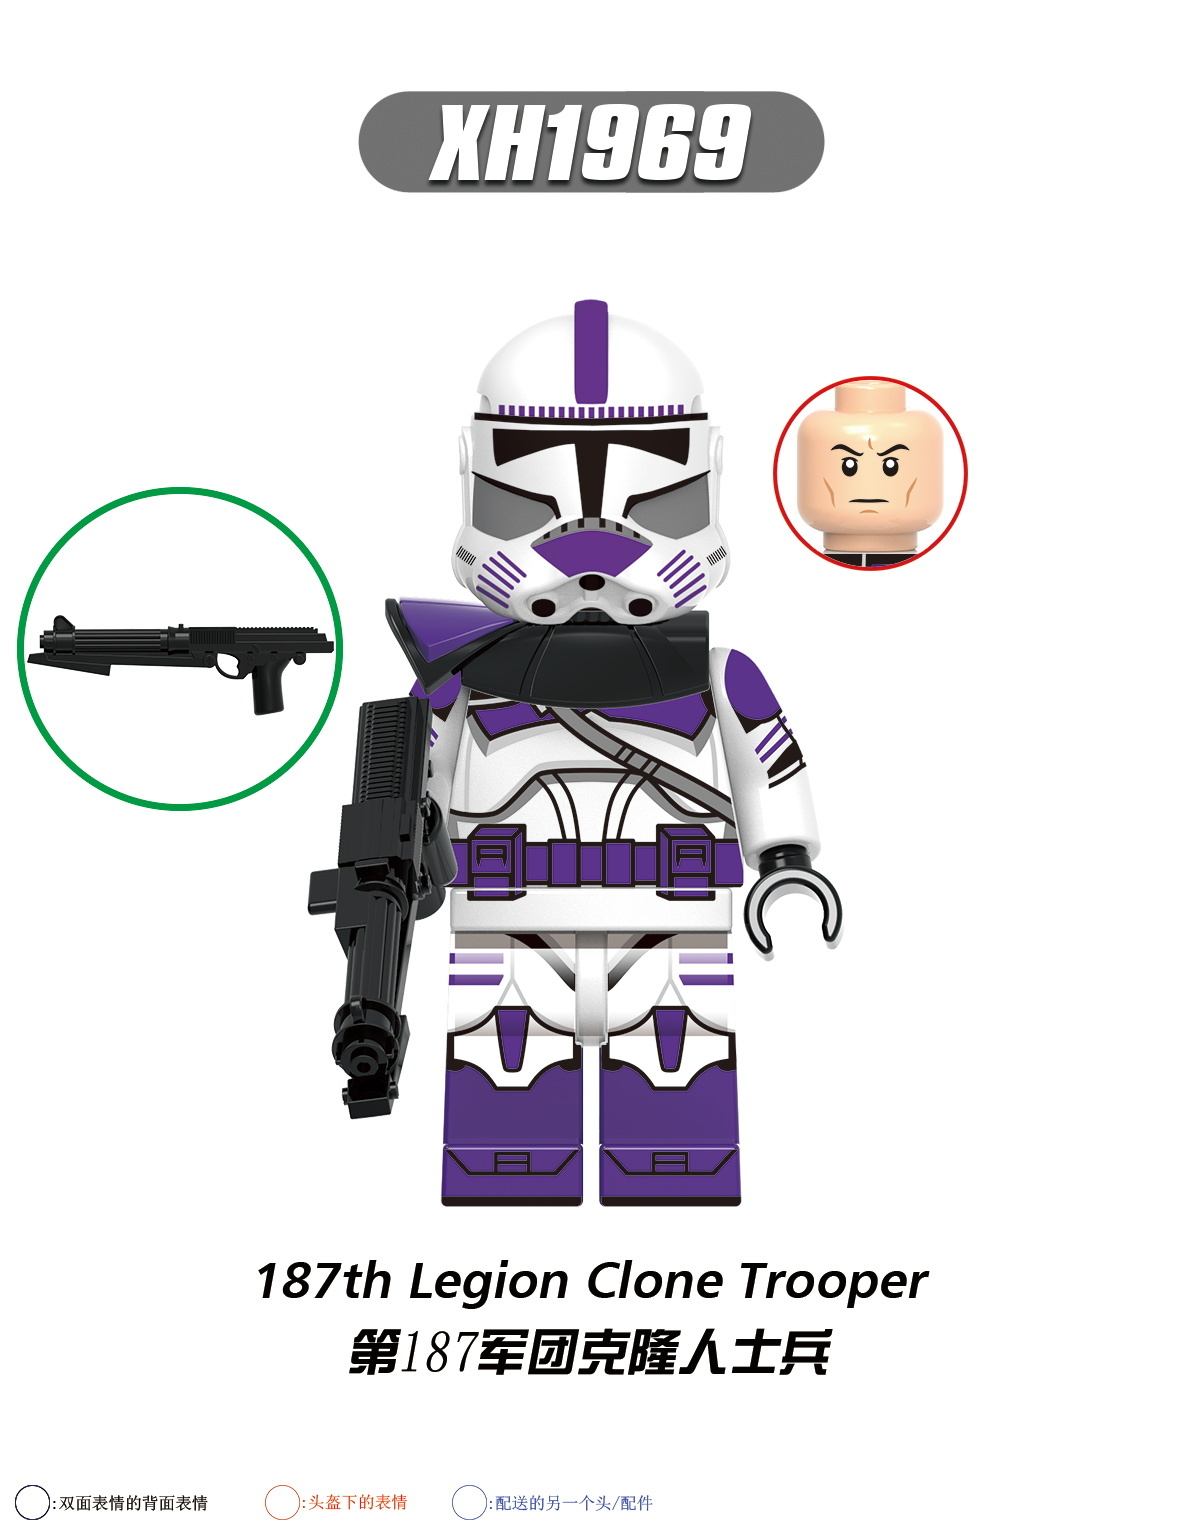 X0344 1964  1965 1966 1967 1968 1969 1970 1971 Star Wars Building Blocks ARC Trooper Echo Tup Clone Trooper Action Figures Educational Toys For Kids Gifts